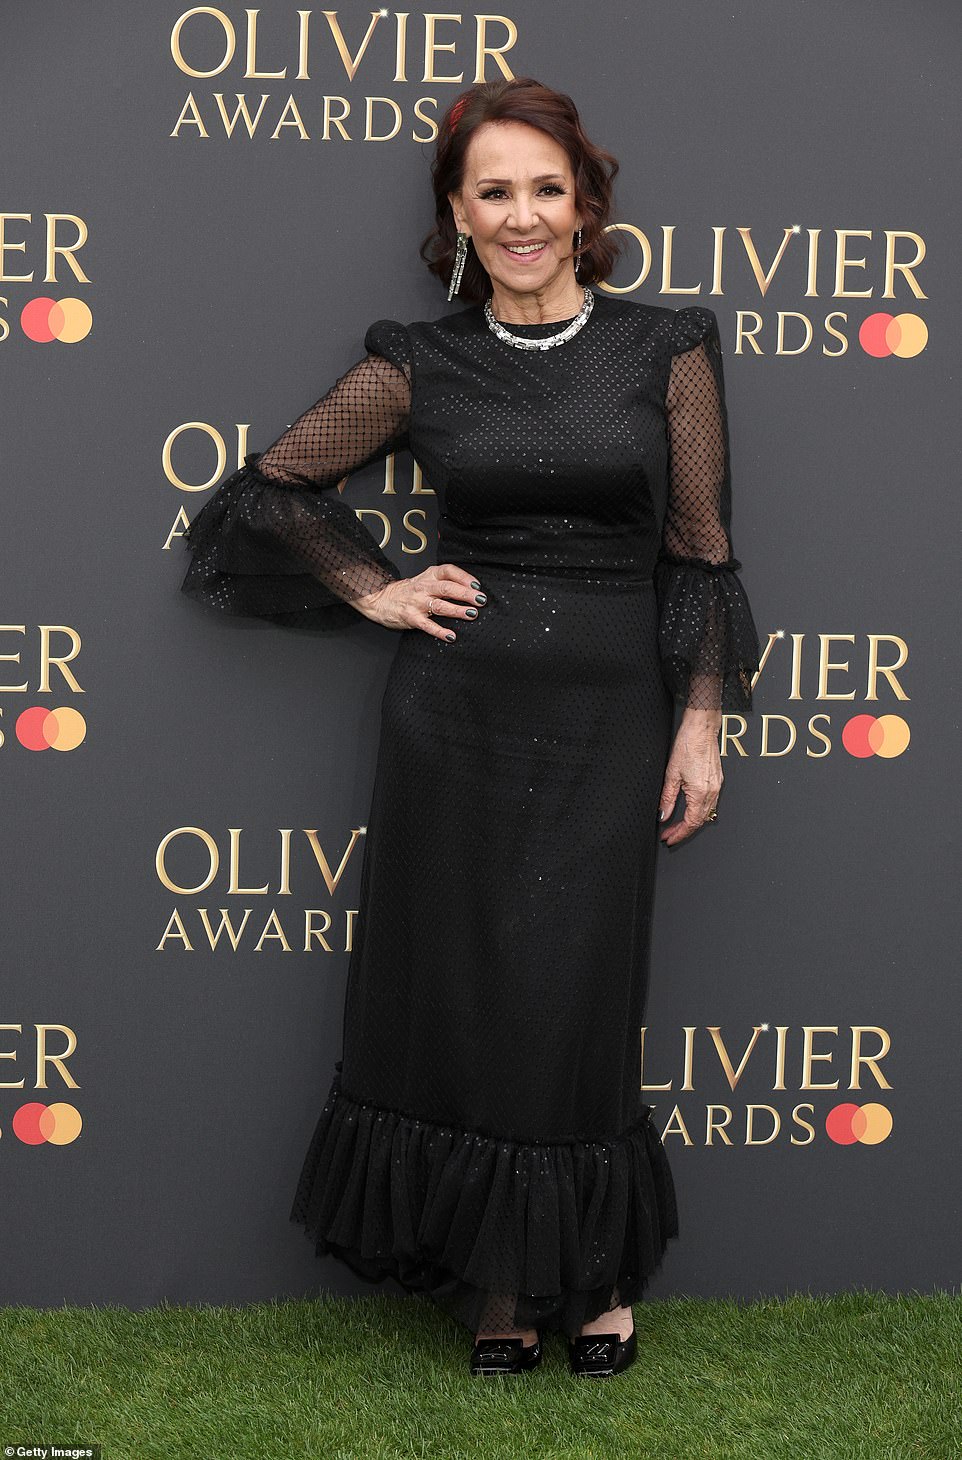 Arlene Phillips, who is up for the Gillian Lynne Award for best theatre choreographer, dazzled in a black ruffled gown with sheer sleeves